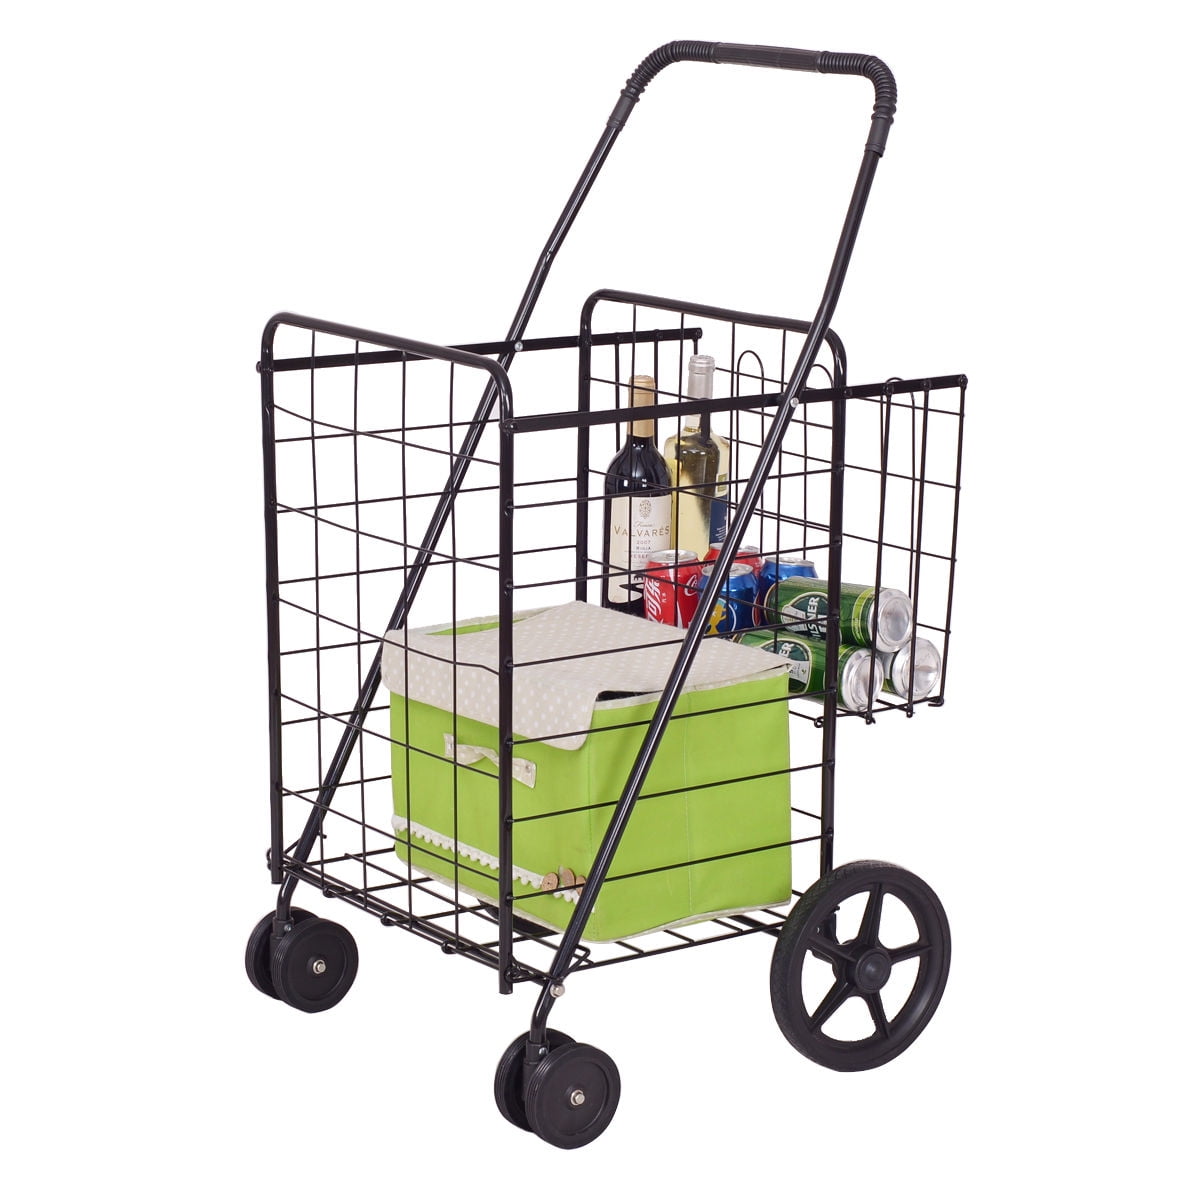 DLUX  Folding Shopping Cart D801S Heavy Duty Grocery/Laundry,Black,On-Time-Del 